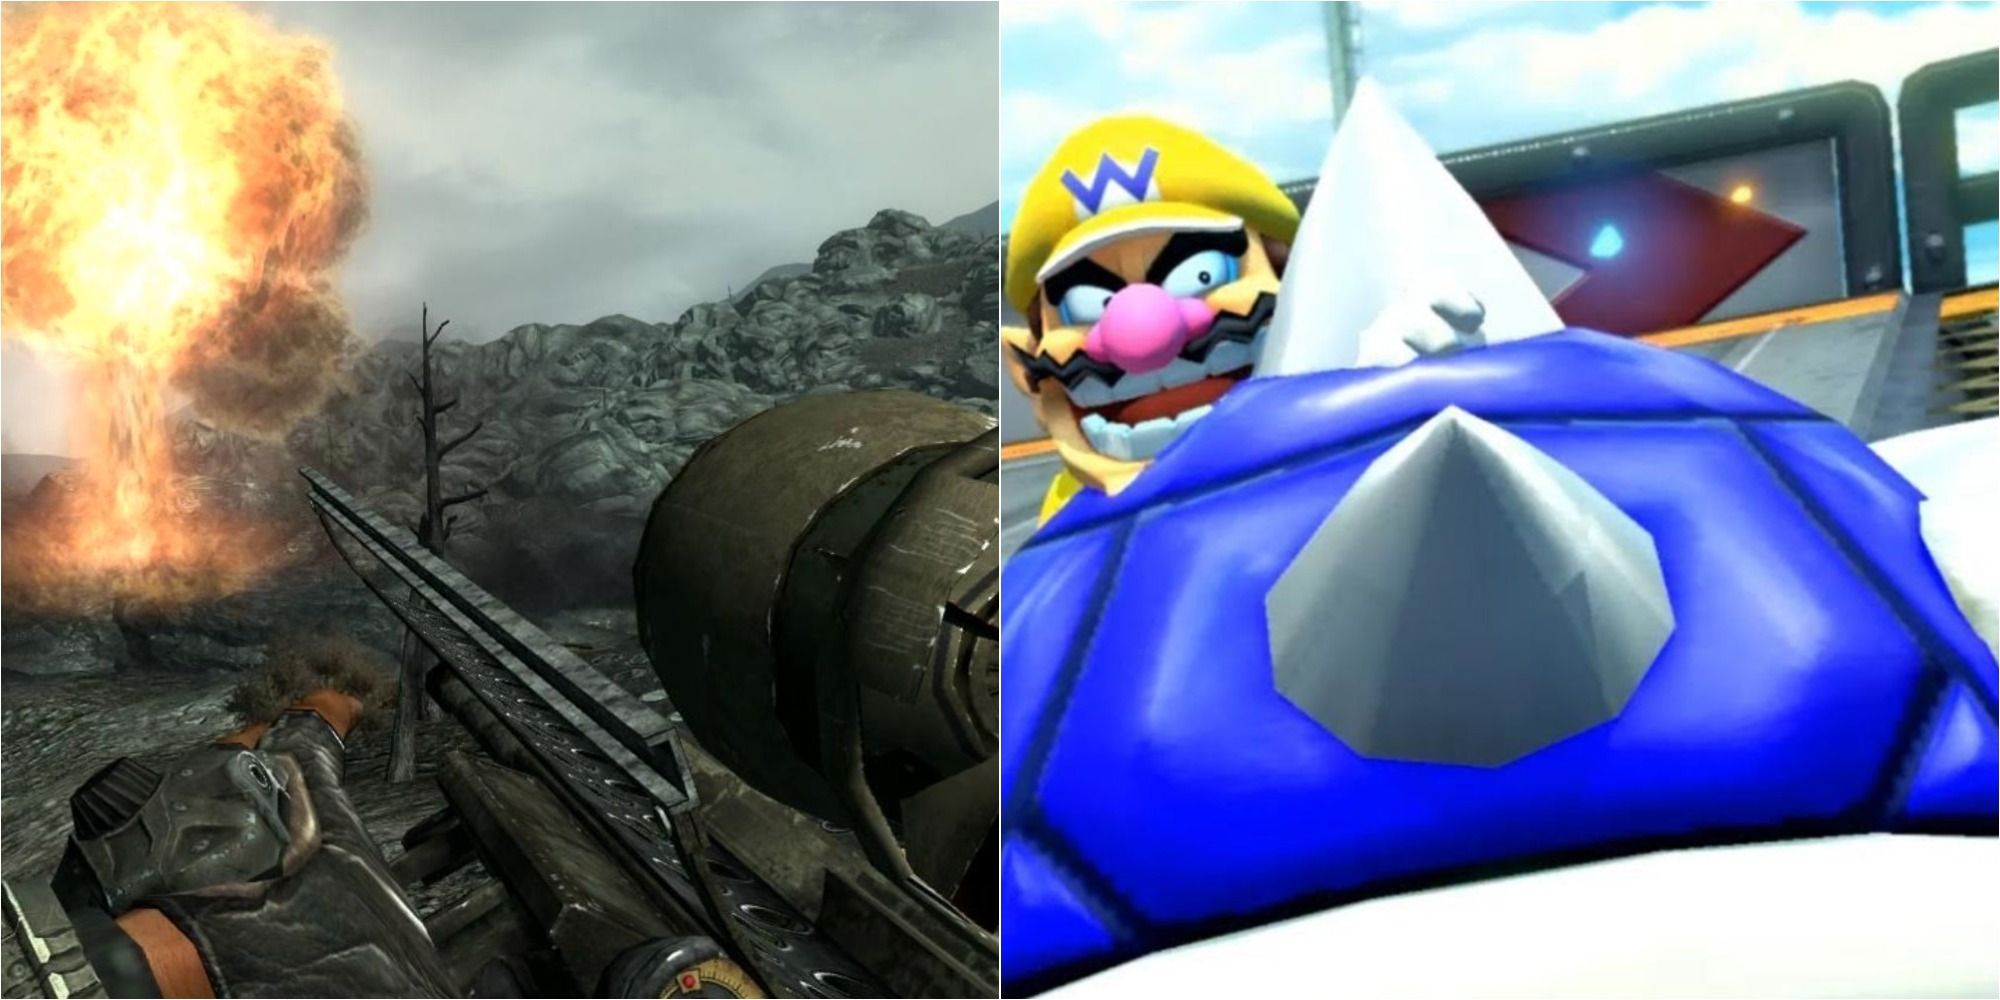 Ridiculous Explosive Weapons Featured Split Image Fallout 3 and Mario Kart